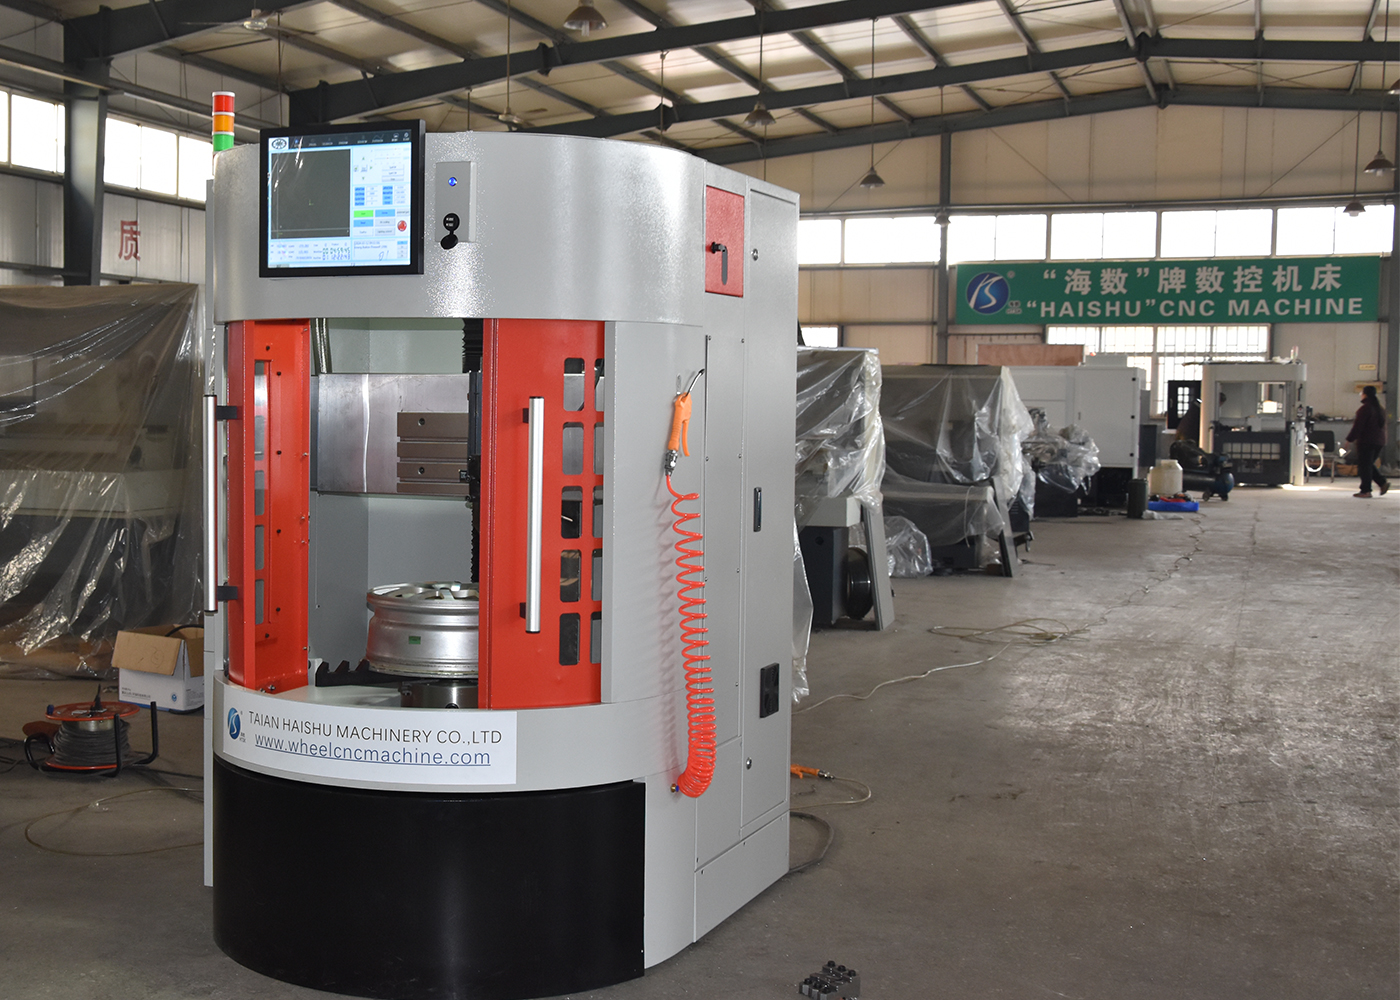 Discover the Latest Innovations in Alloy Wheel CNC Lathe Technology